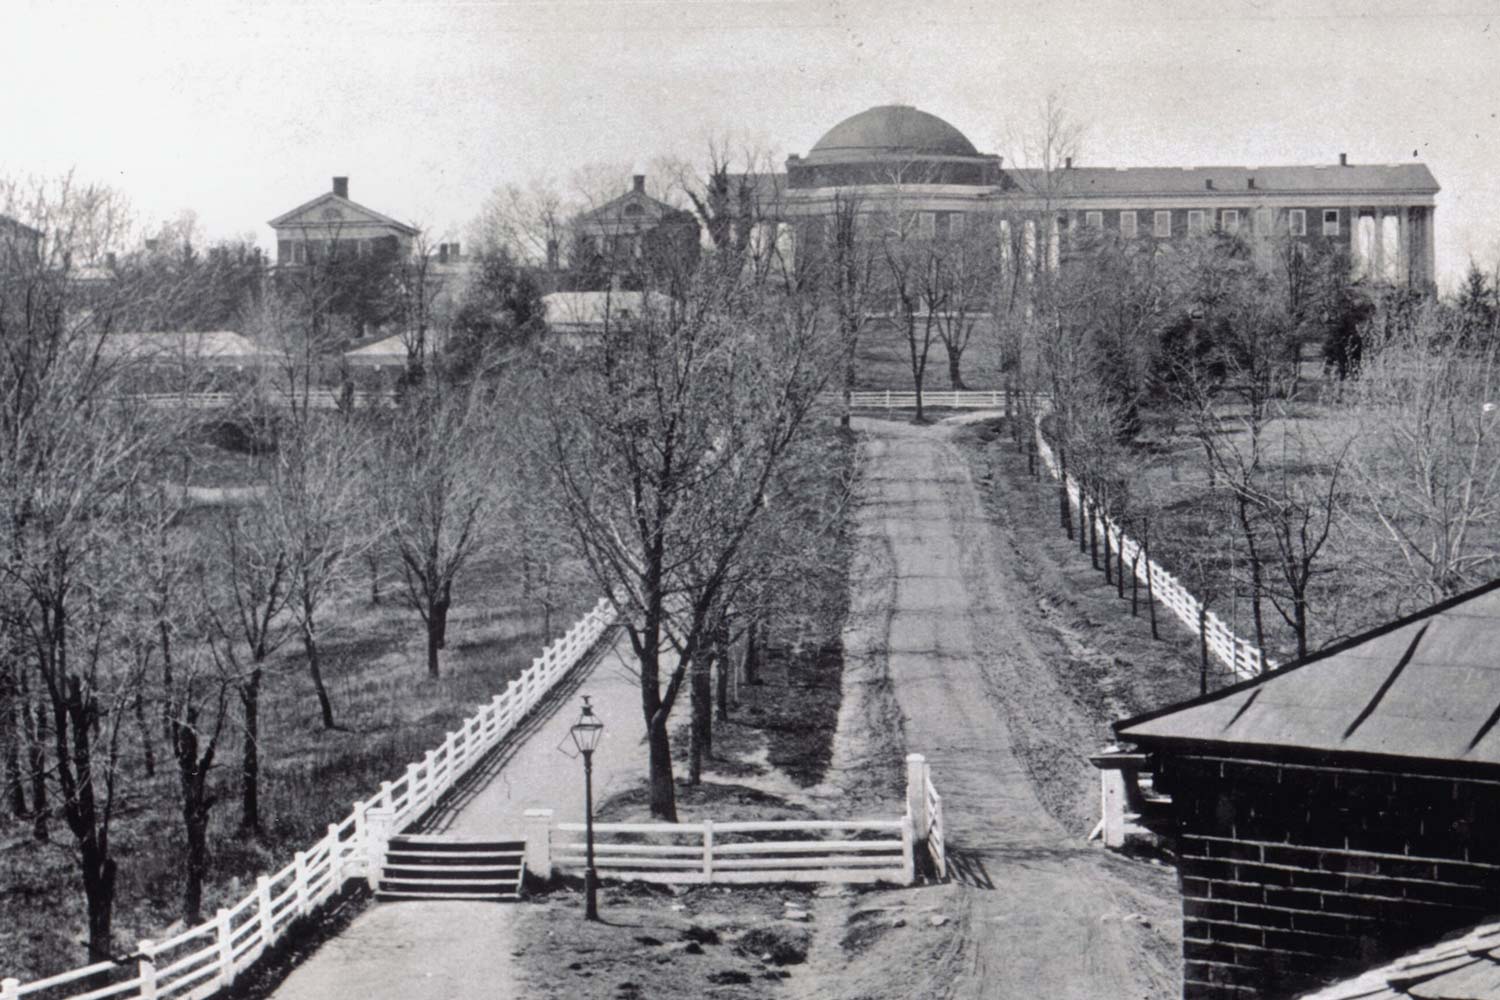 Dirt road that led to the Rotunda